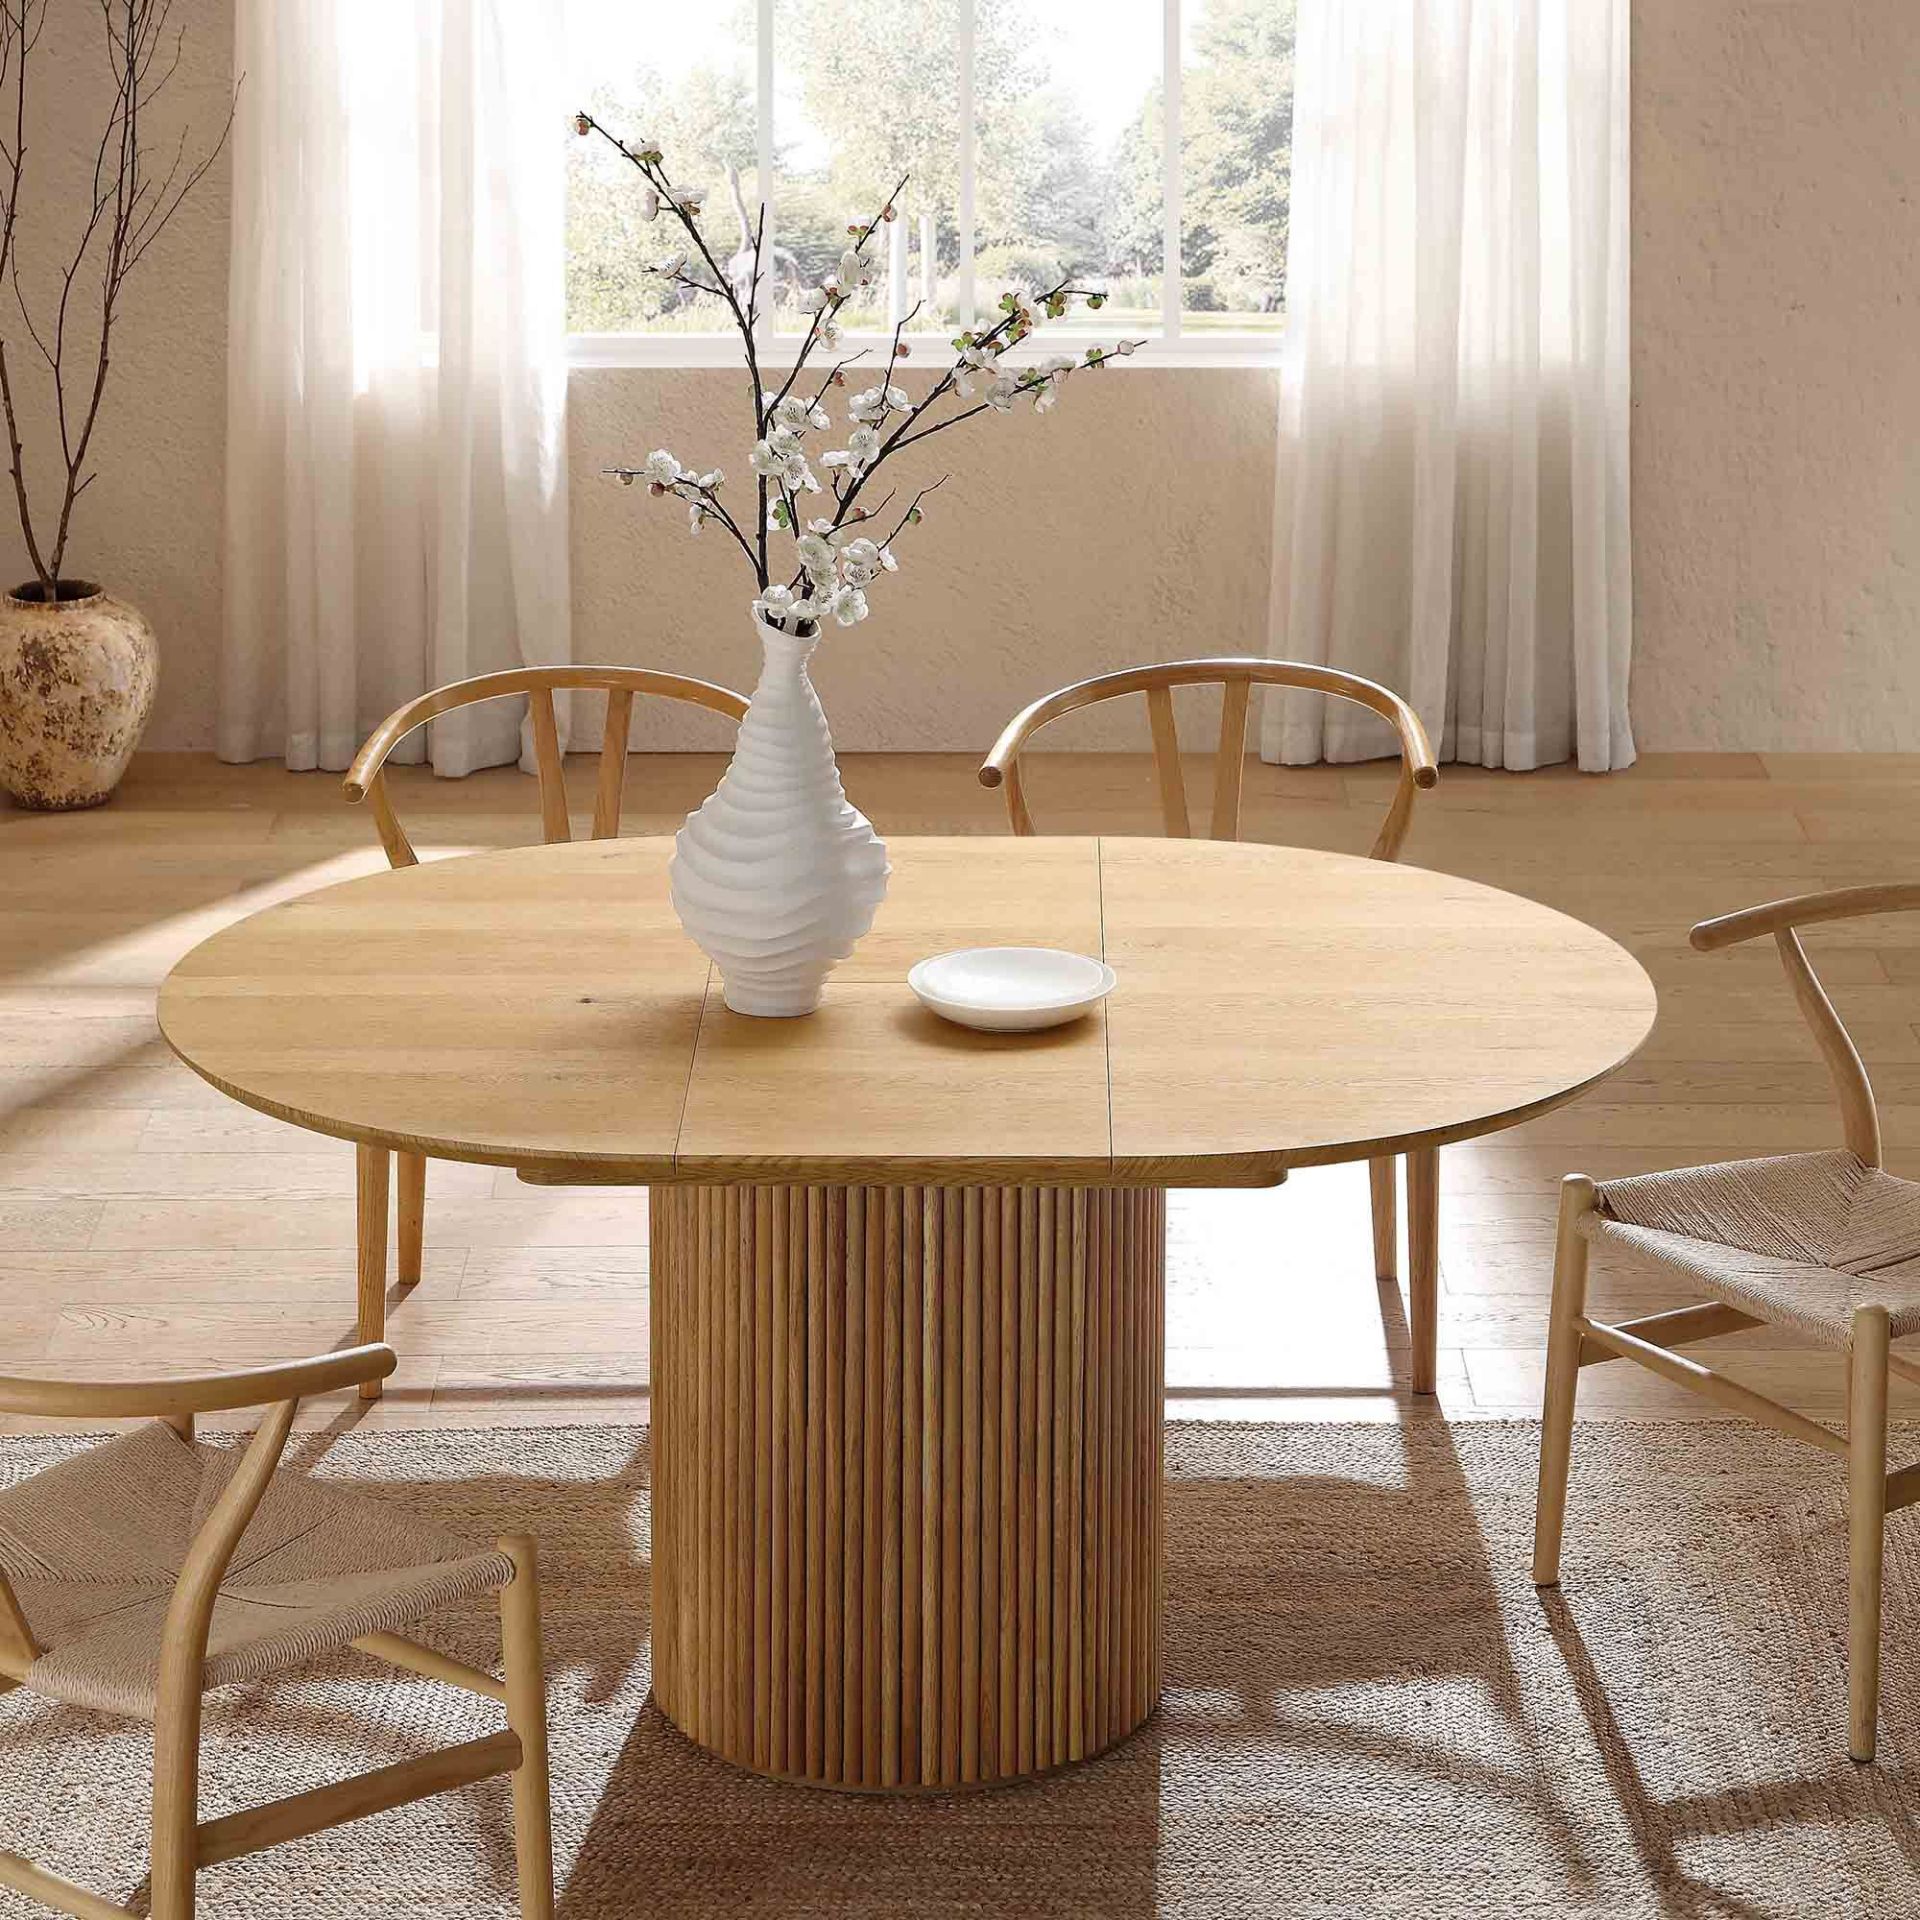 Maru Round 4-6 Seater Extending Oak Pedestal Dining Table, Oak. - R14. RRP £529.99. Our Maru - Image 2 of 2